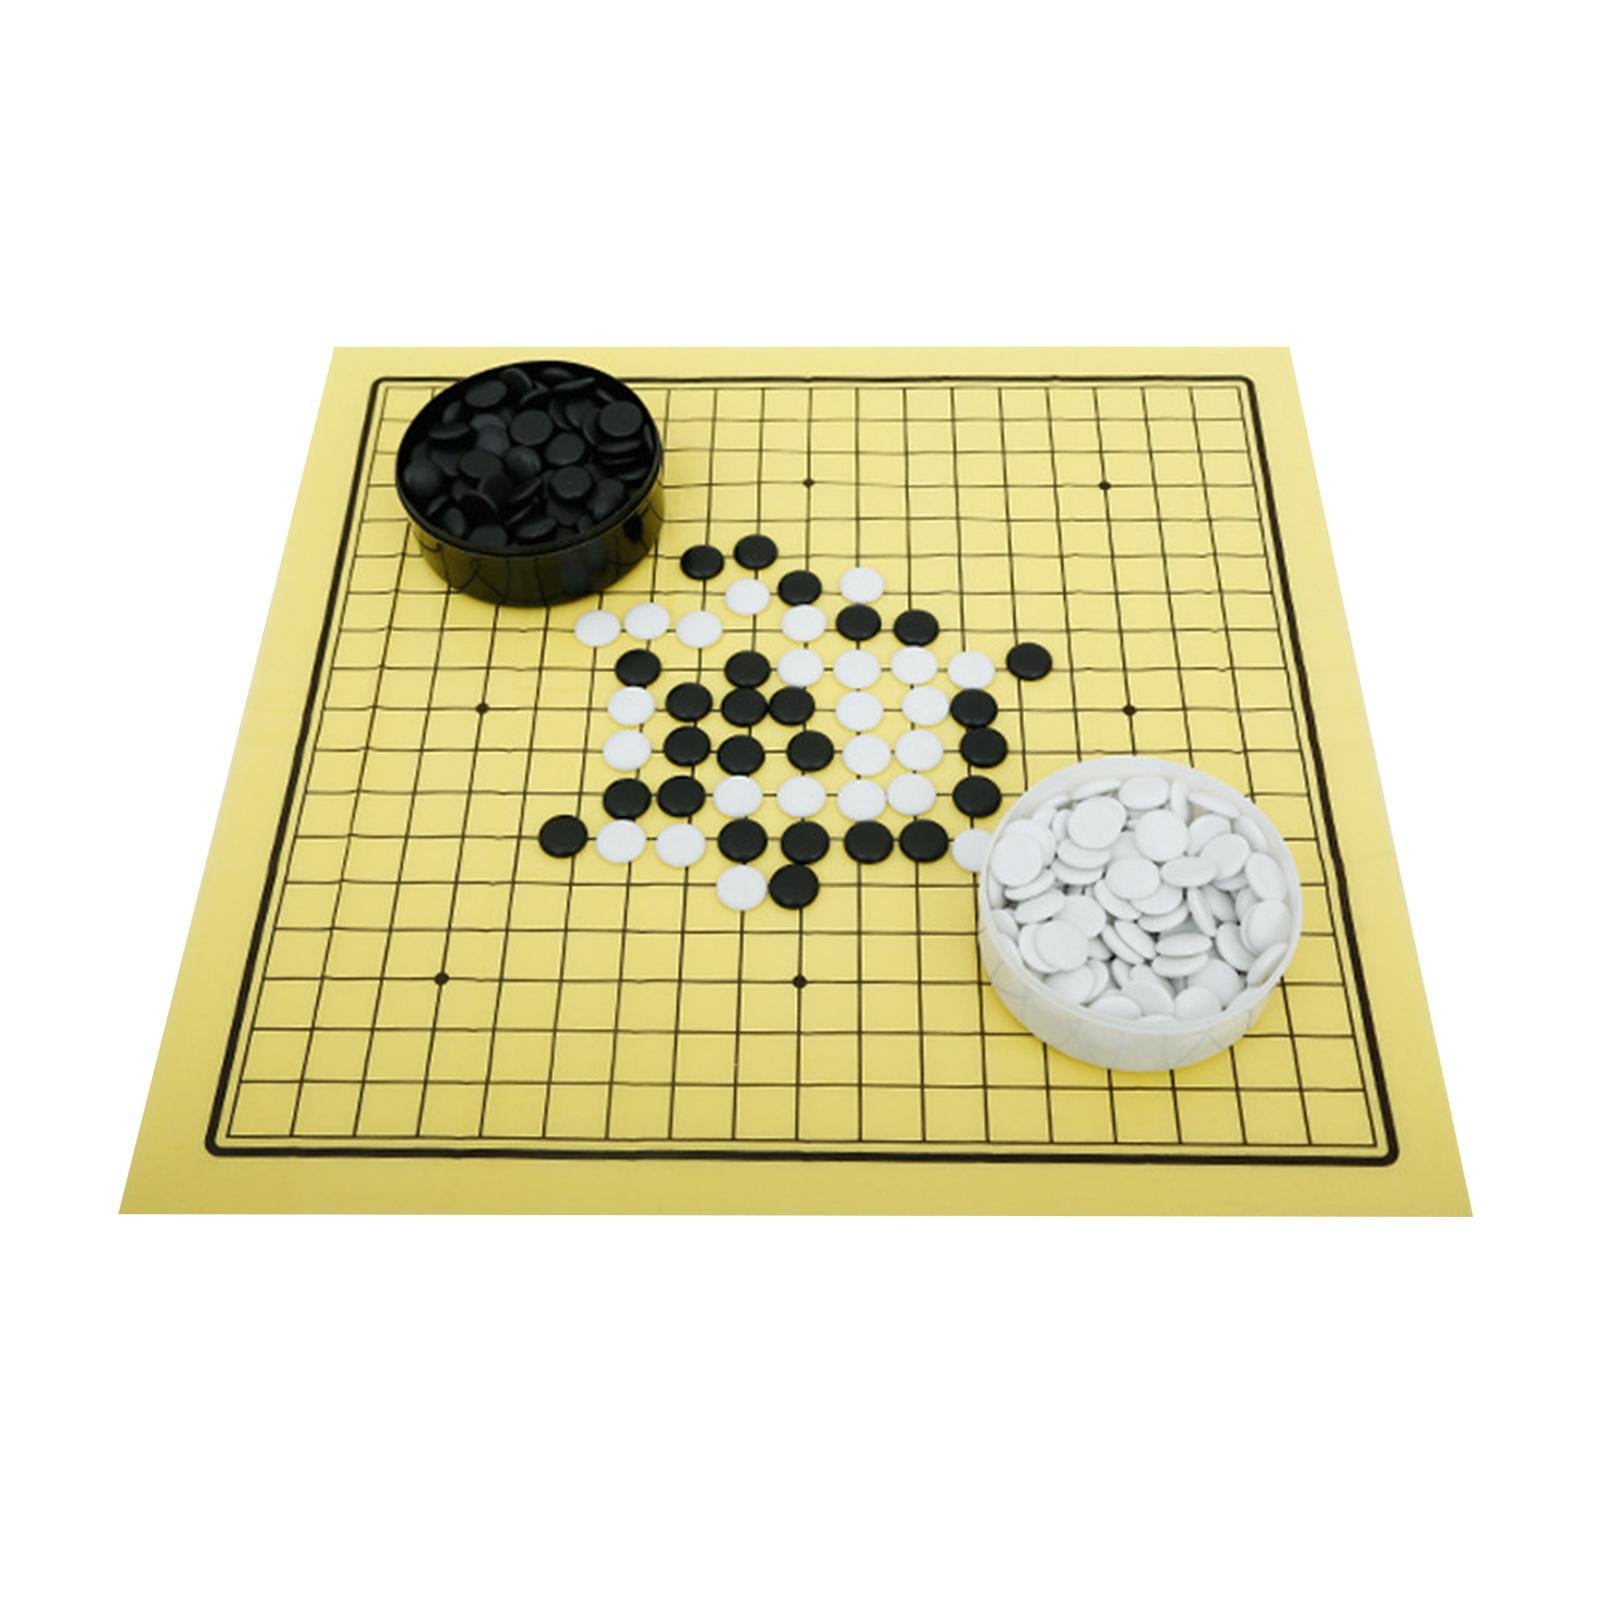 Details about   Chess Board Weiqi Children's Educational Leather Folding Go Game Entertainment 